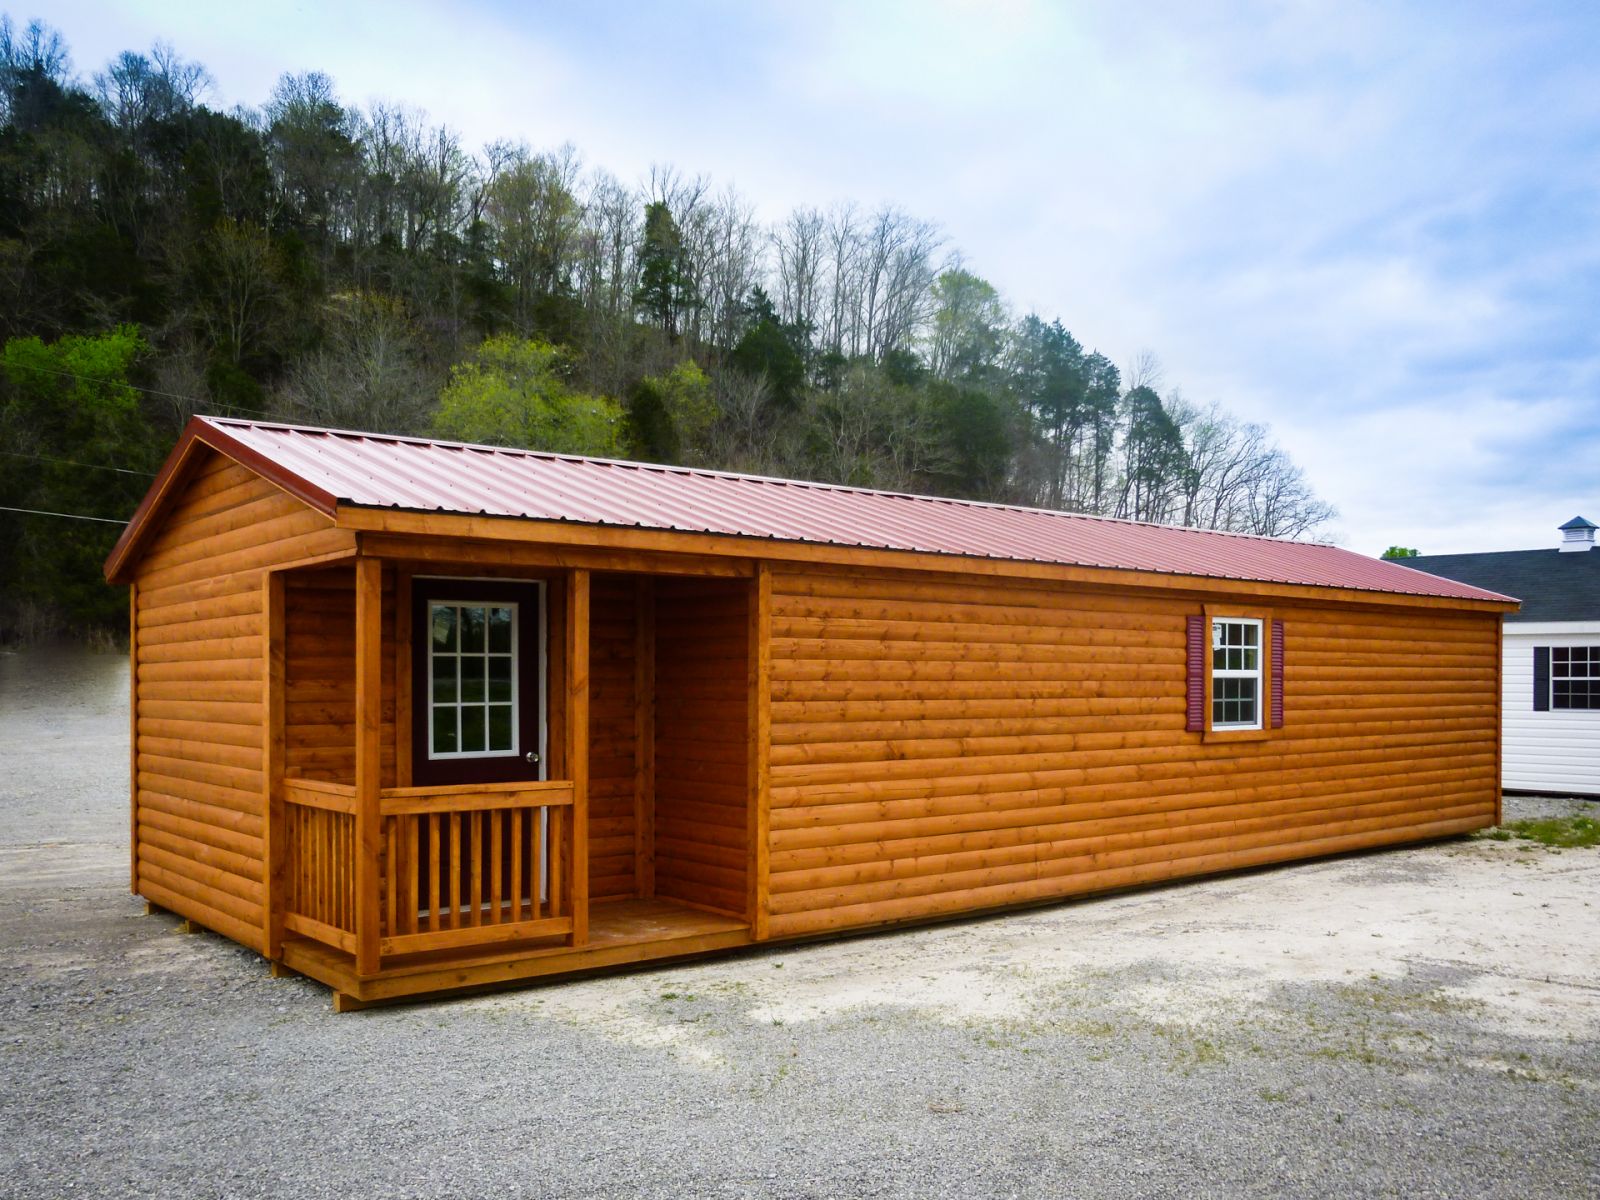 A prefab cabin shed for sale in Bowling Green, KY